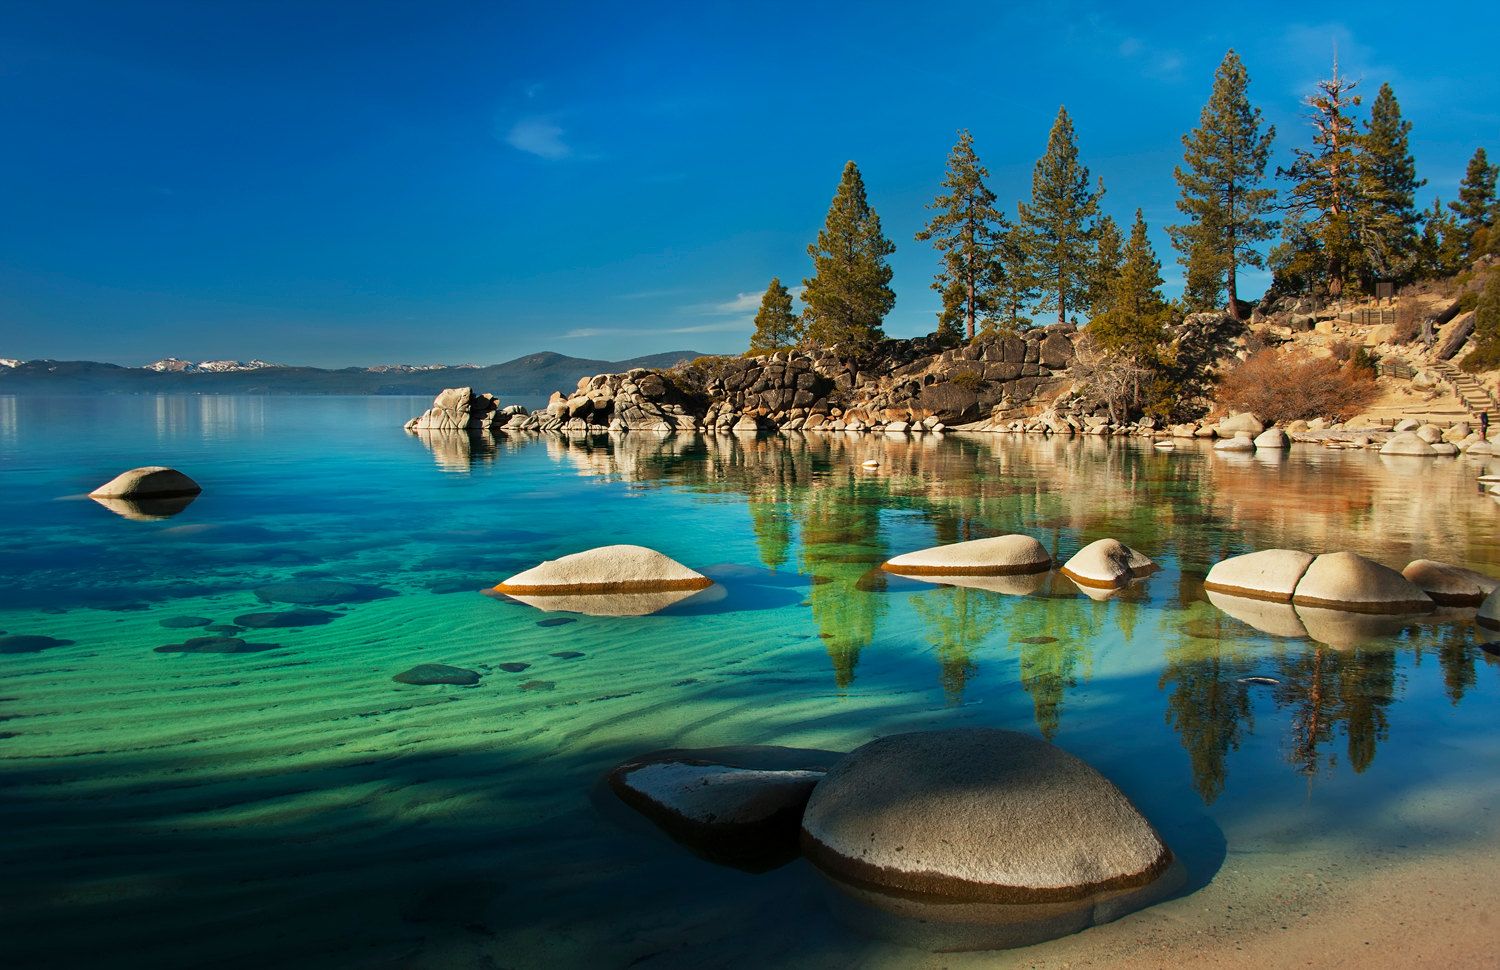 1500x970 Free Download Lake Tahoe Botox Beer Bling 1500x970 For Your Desktop Mobile Tablet Explore South Lake Tahoe Wallpaper Lake Tahoe Free Wallpaper Lake Tahoe Hd Wallpaper Lake Tahoe 4k Wallpaper